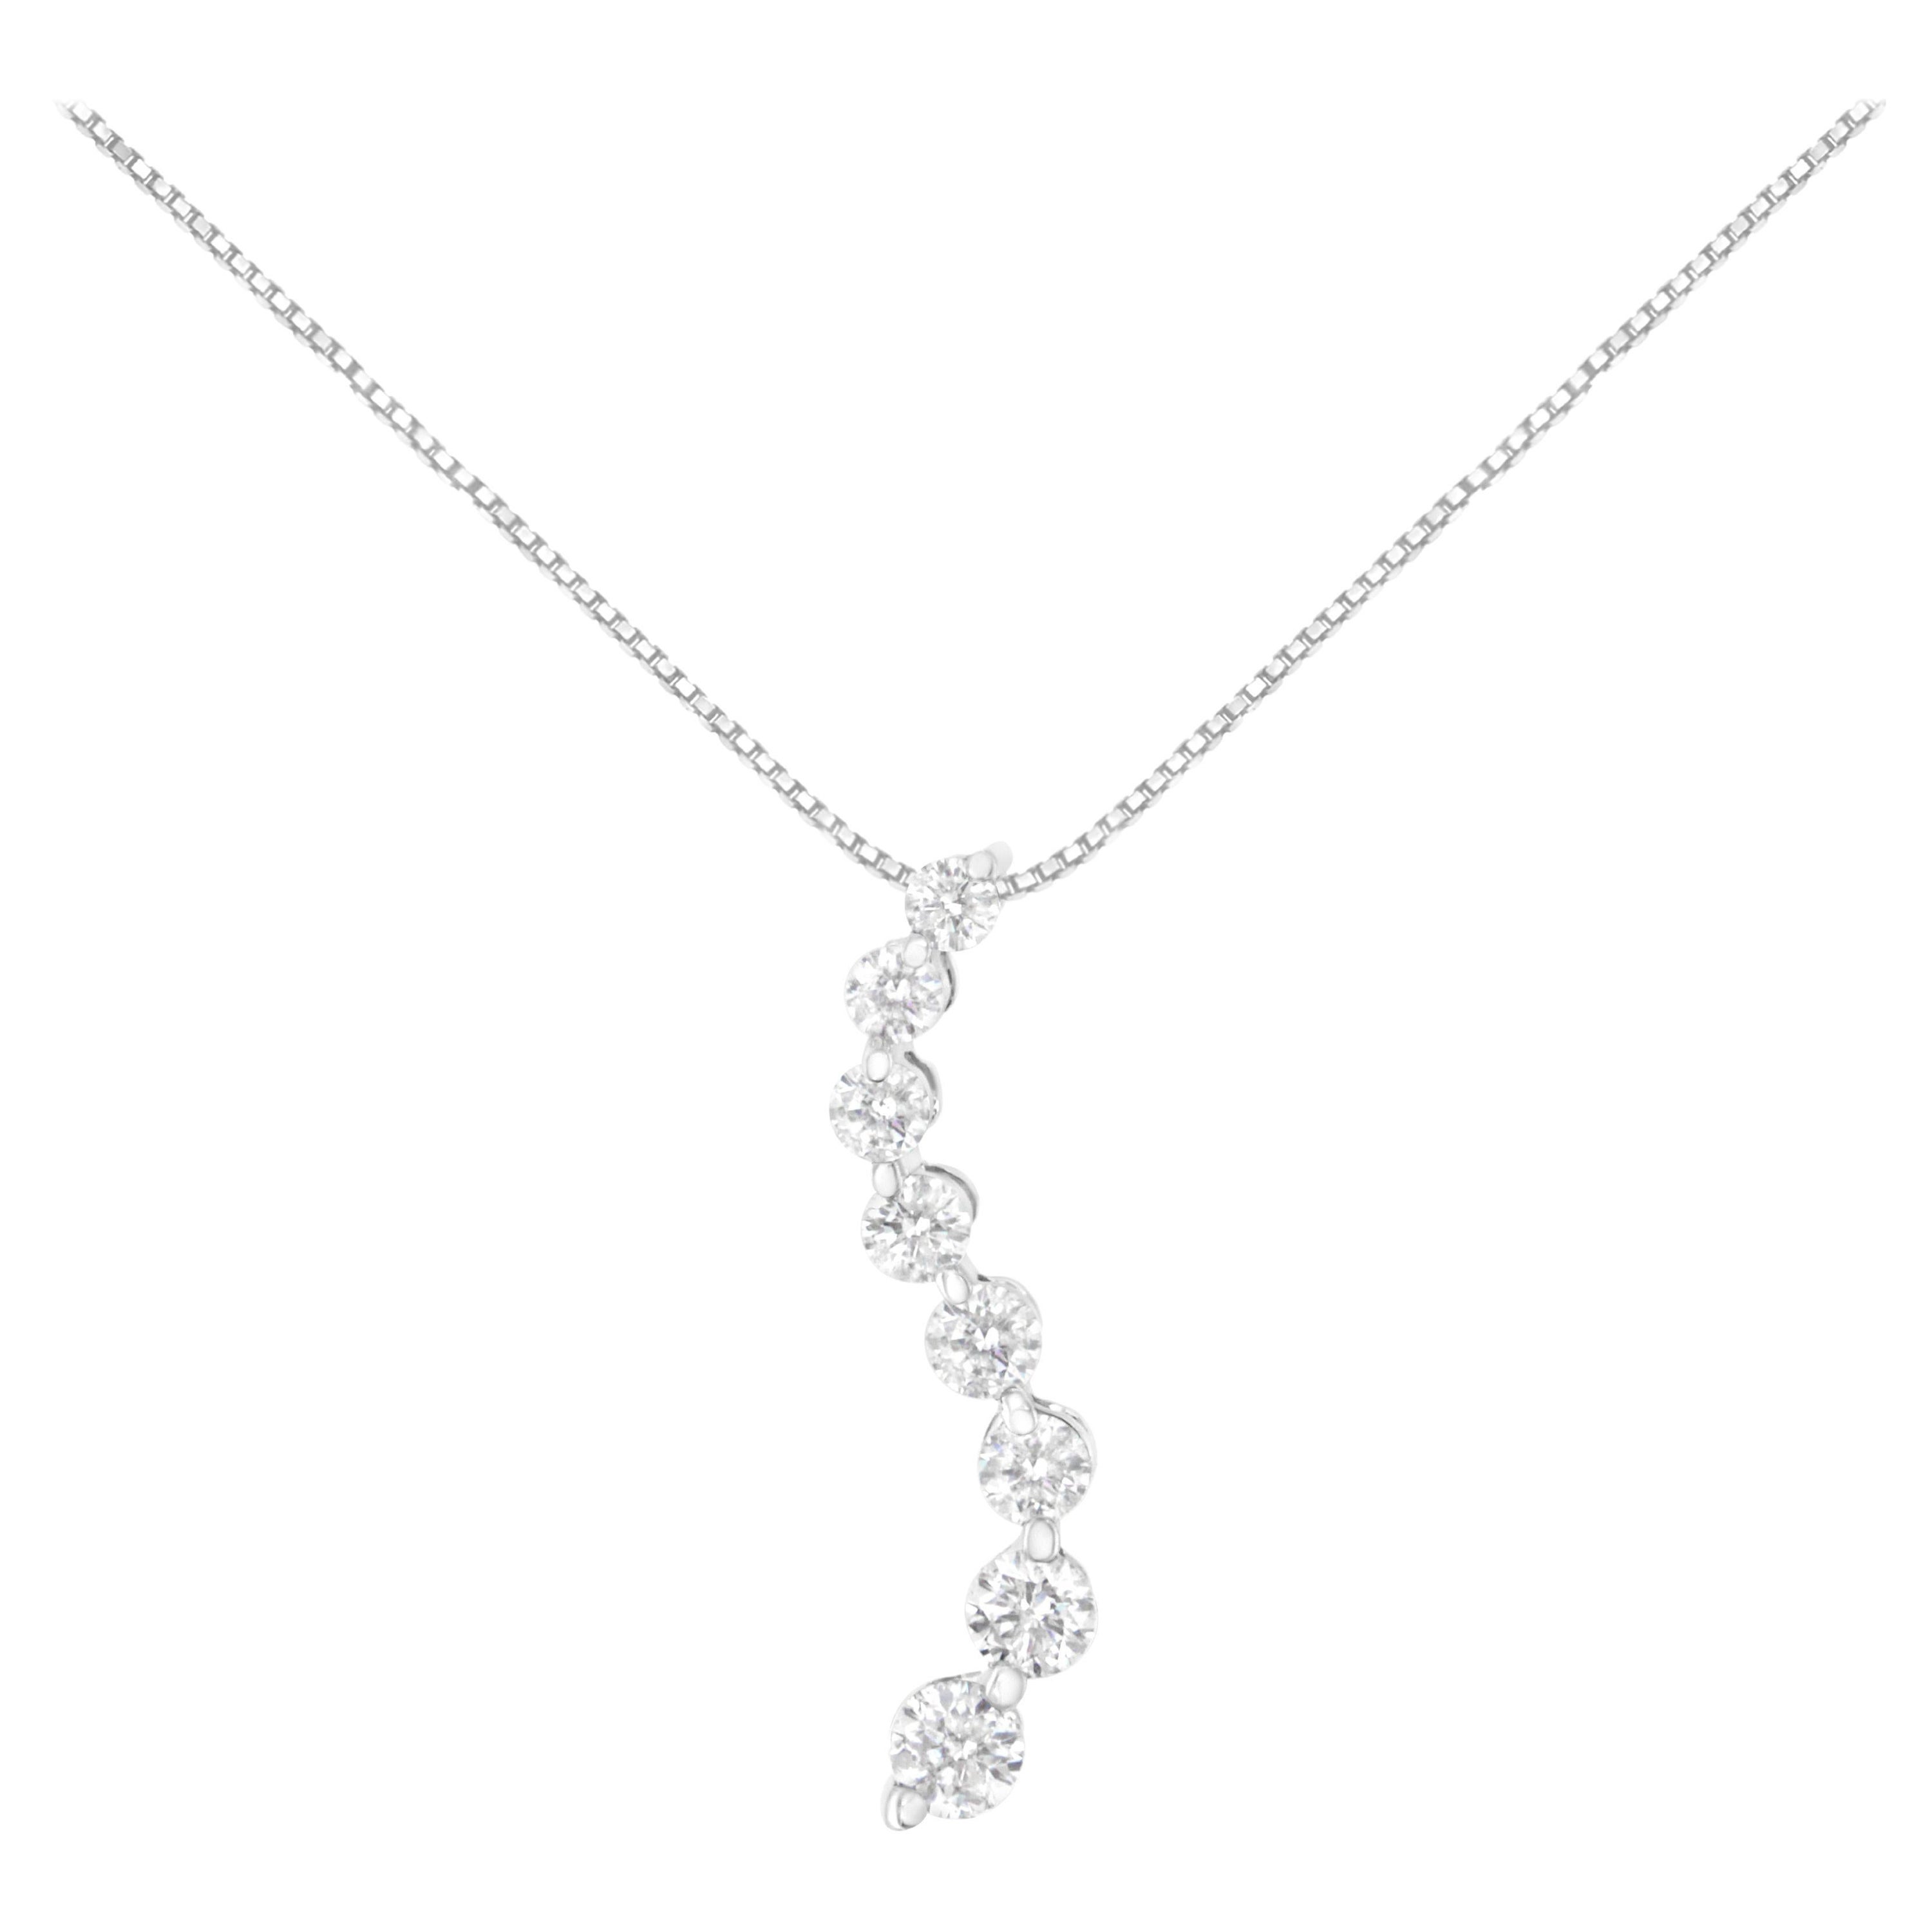 AGS Certified 14K White Gold 3.0 Carat Diamond Journey Pendant Necklace